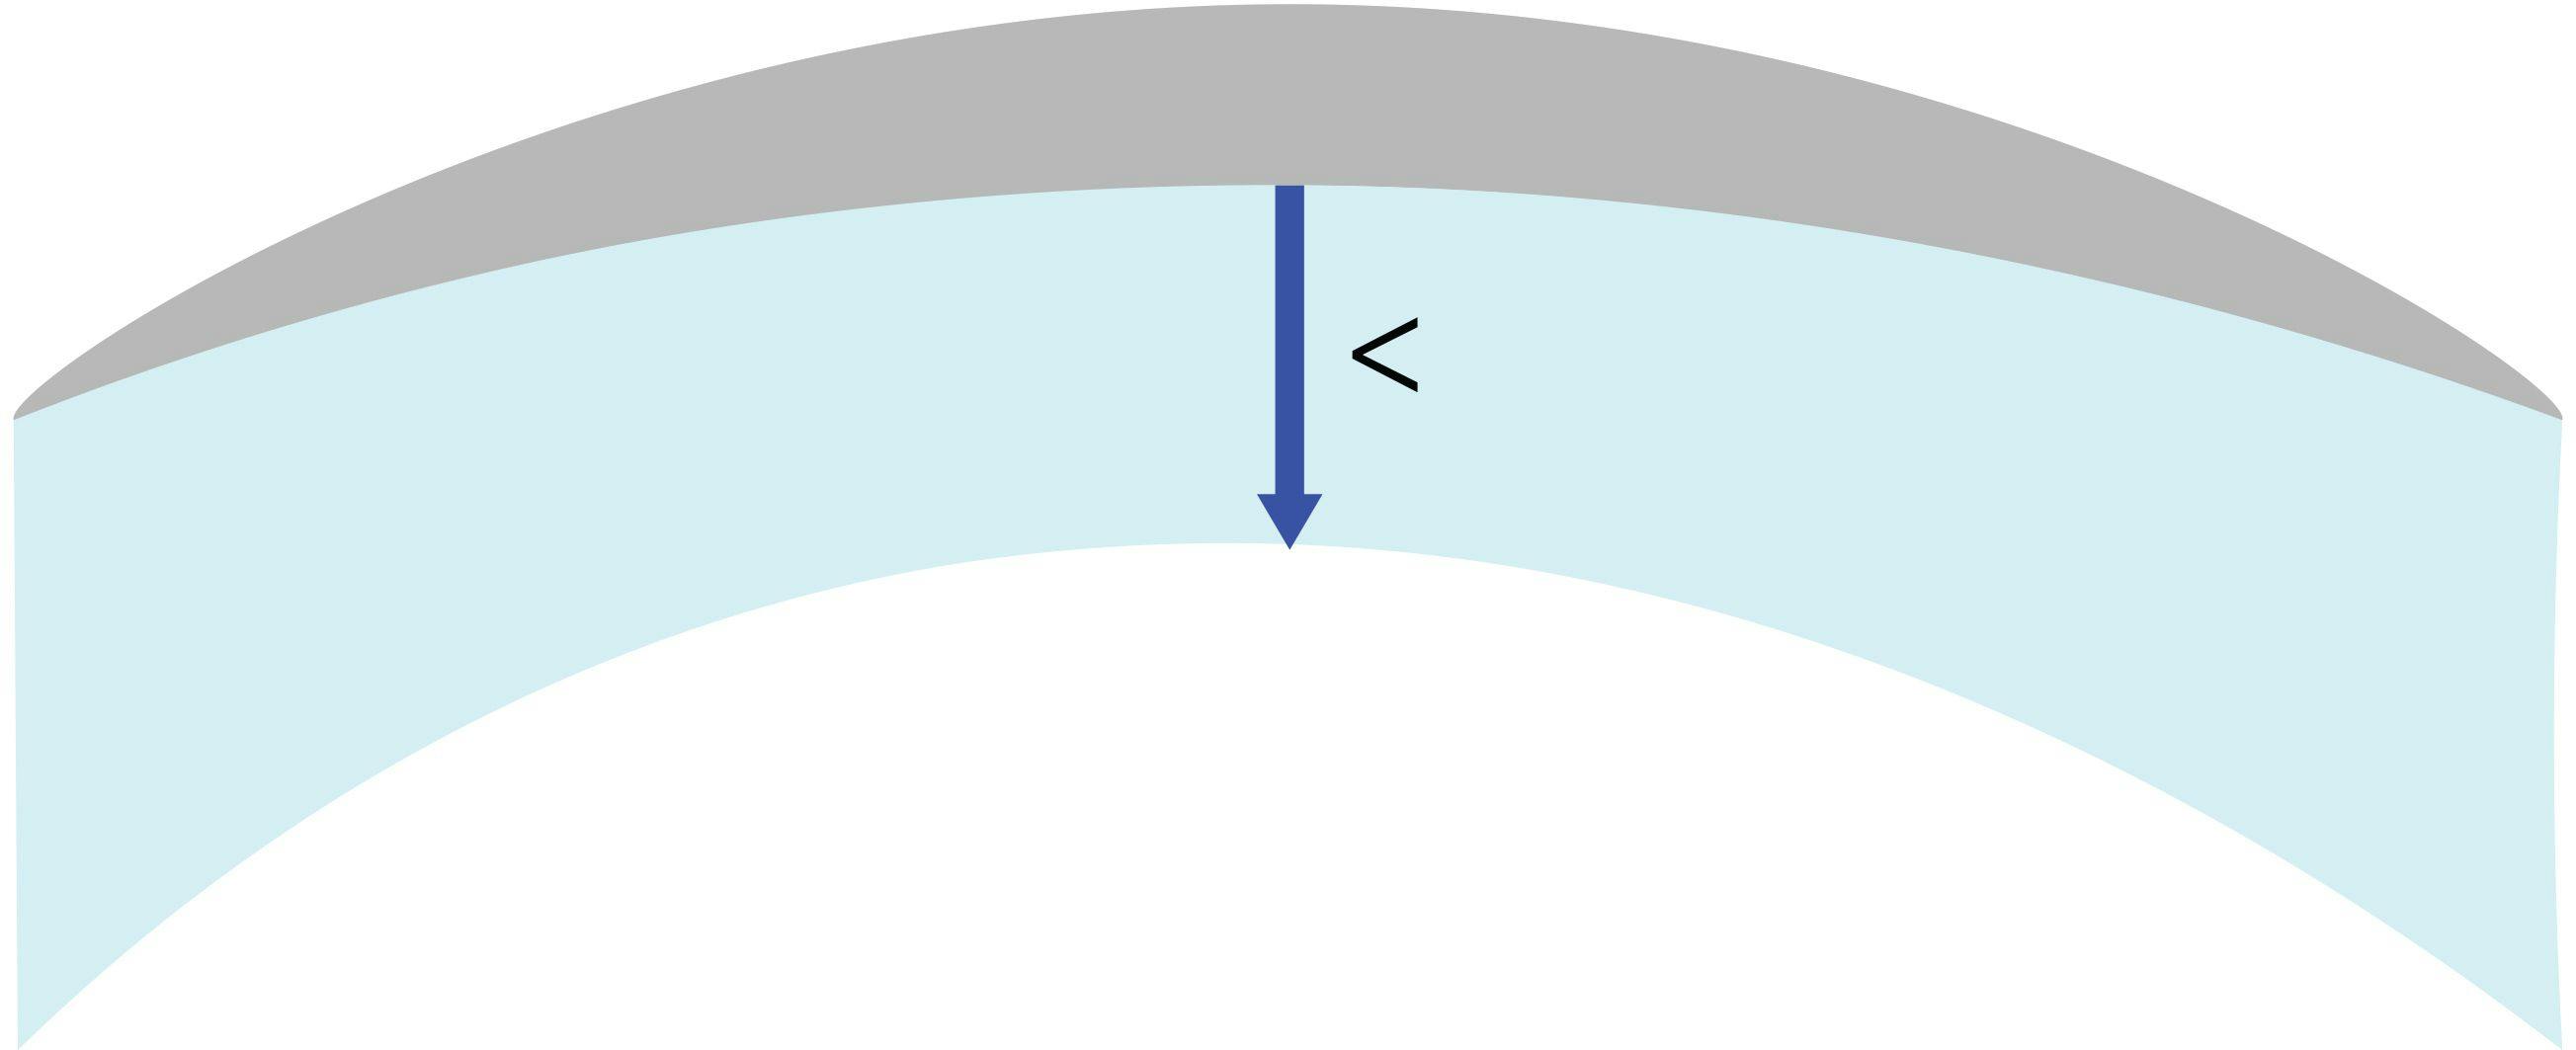 Figure 1 illustrates keratometric index error. Preoperatively (top), a fixed ratio between the anterior and posterior corneal curvature allows the calculation of the corneal power with the fictitious 1.3375 (or 1.3315) keratometric index. Postoperatively, the anterior corneal surface is flattened, the ratio is altered and the keratometric index leads to a wrong calculation of the corneal power, which is overestimated.